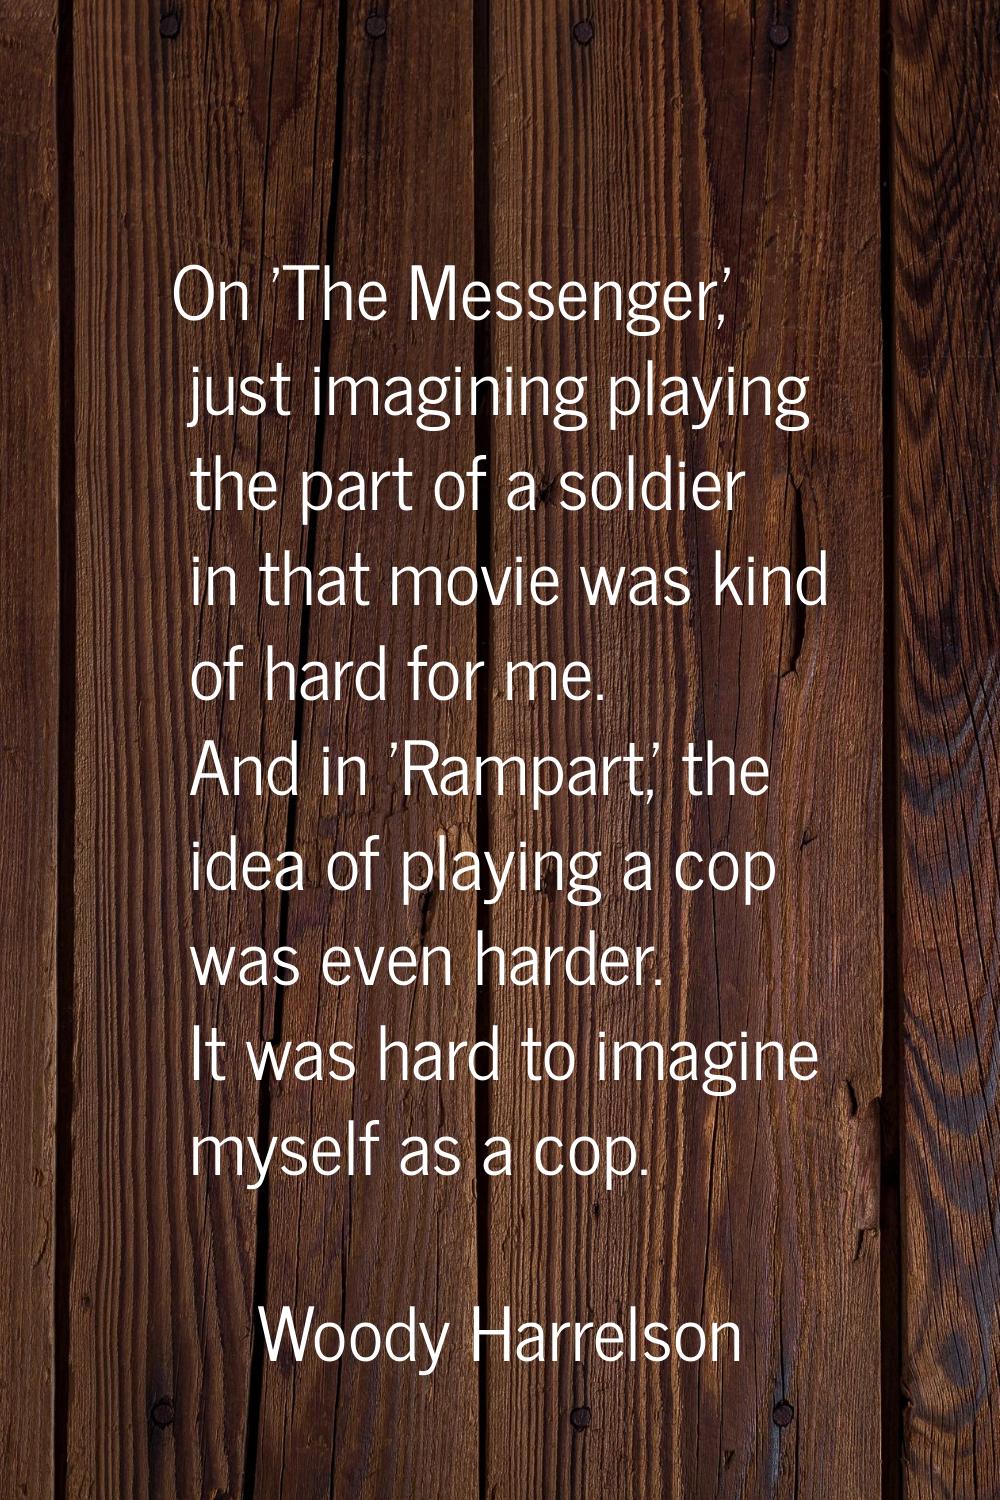 On 'The Messenger,' just imagining playing the part of a soldier in that movie was kind of hard for